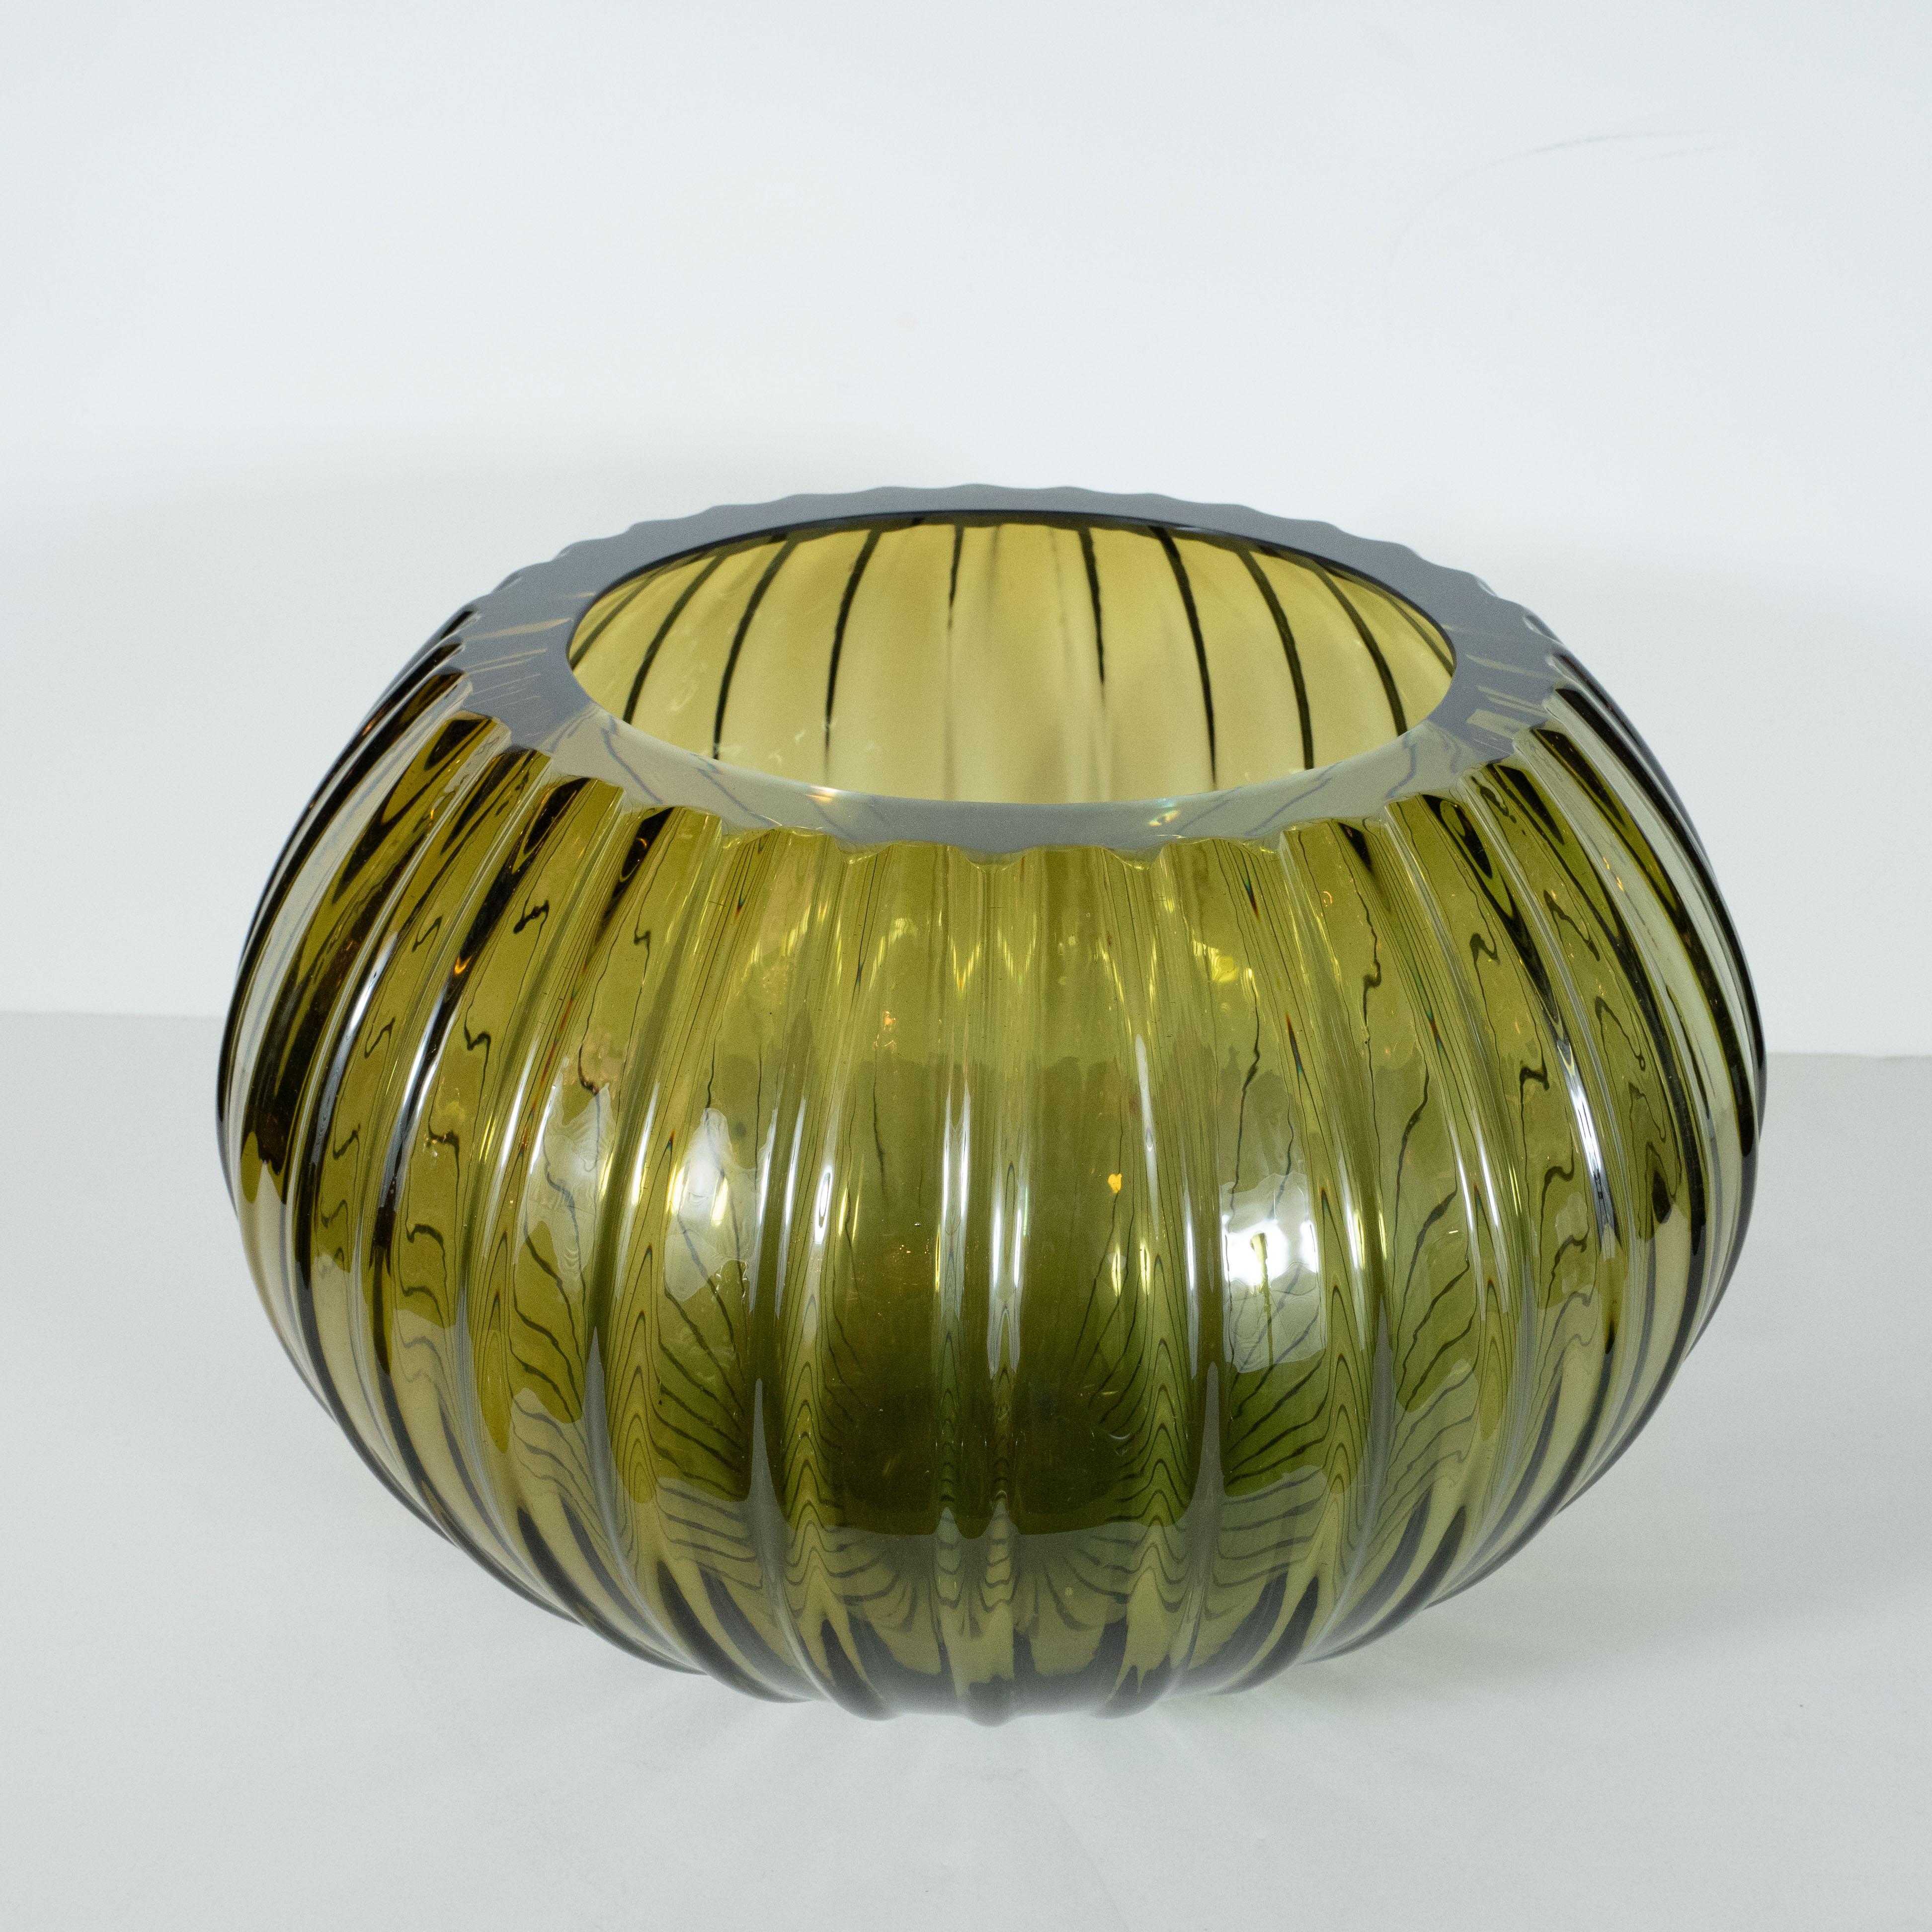 This stunning modernist decorative bowl was hand blown in Murano, Italy- the island off the coast of Venice renowned for centuries for its superlative glass production. It features a subtly ribbed body that expands to its equatorial centre before